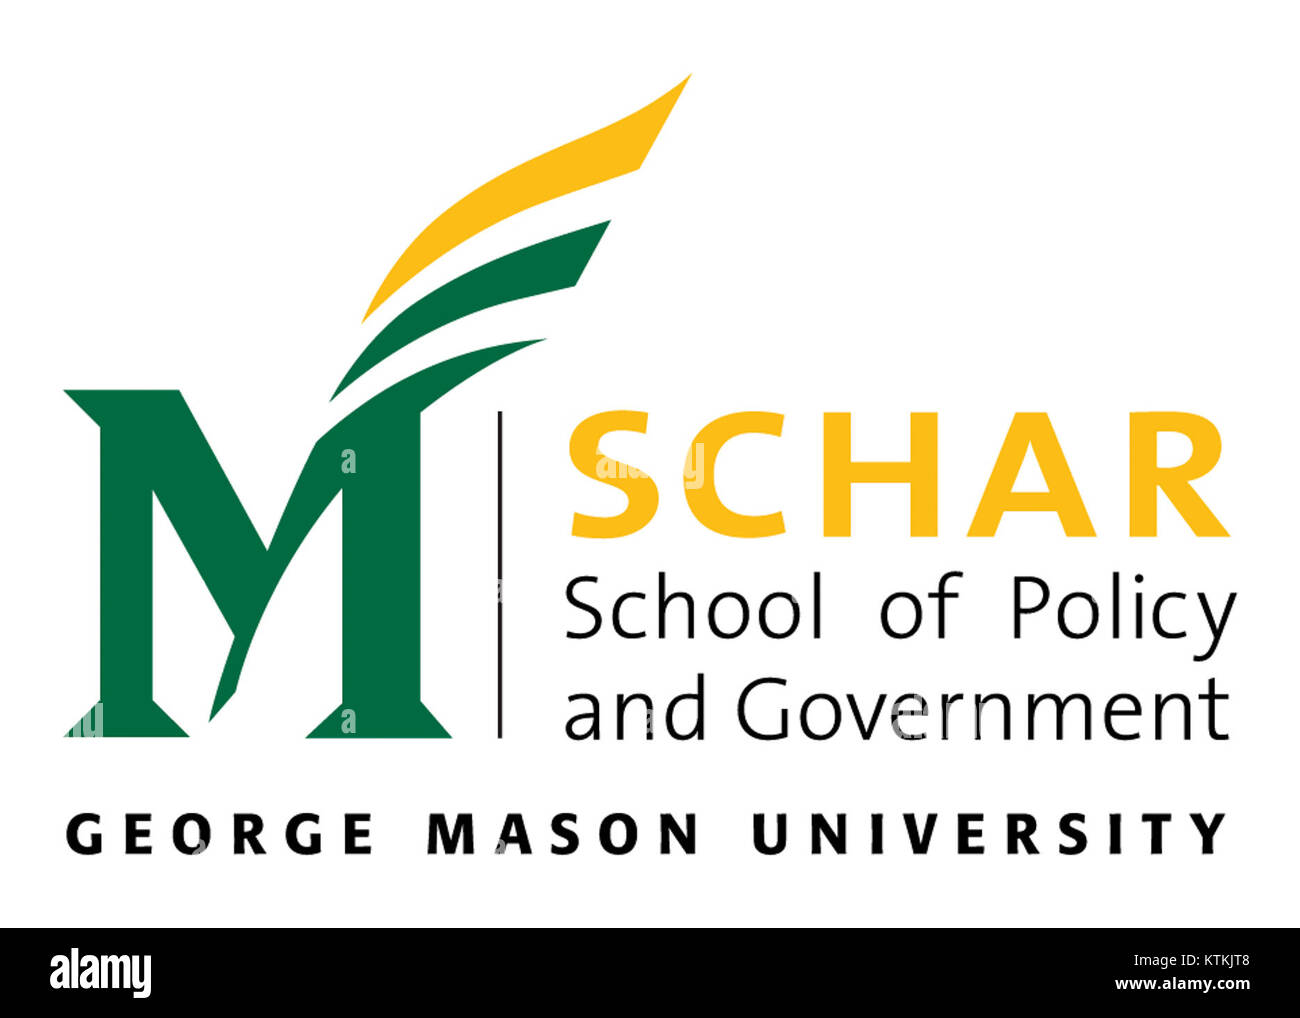 GMU Primary Logo FromBluetext Color Stock Photo